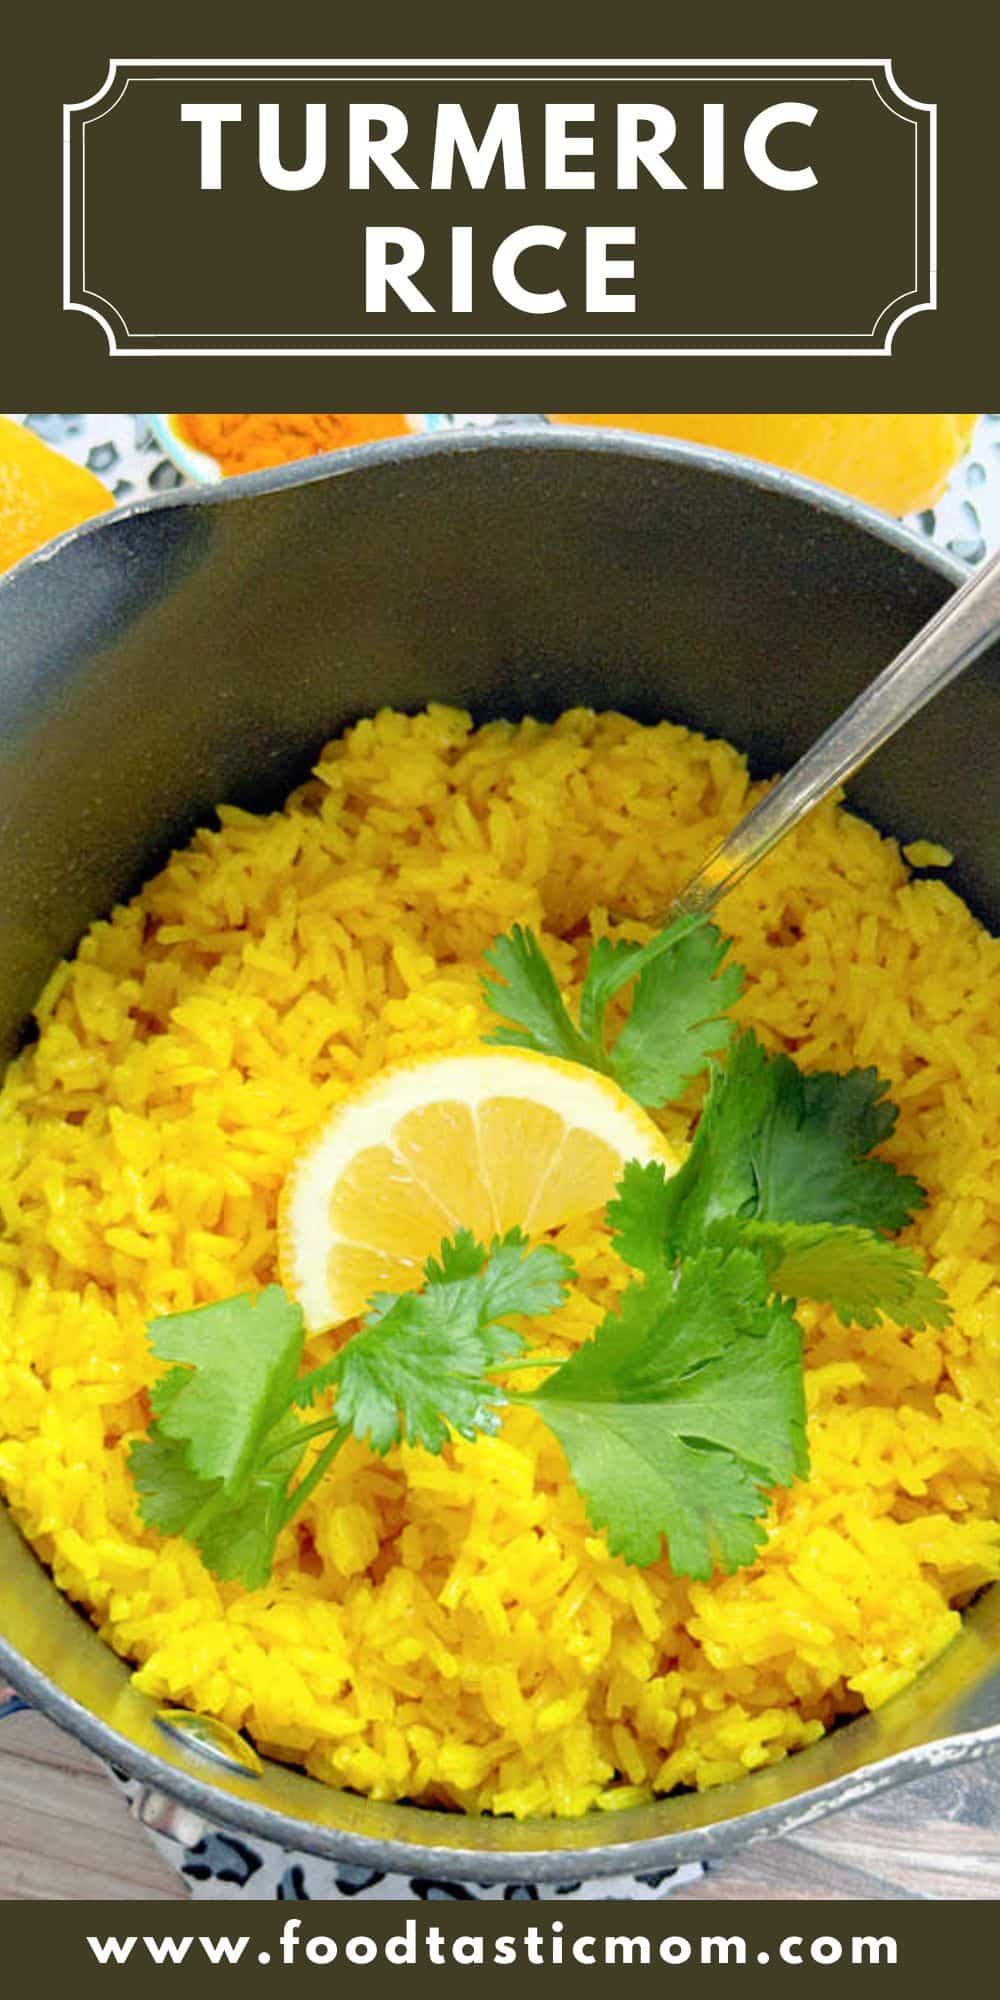 Turmeric Rice is an easy and colorful side dish. The rice is fragrant and delicious with turmeric, garlic, butter and fresh lemon juice. via @foodtasticmom